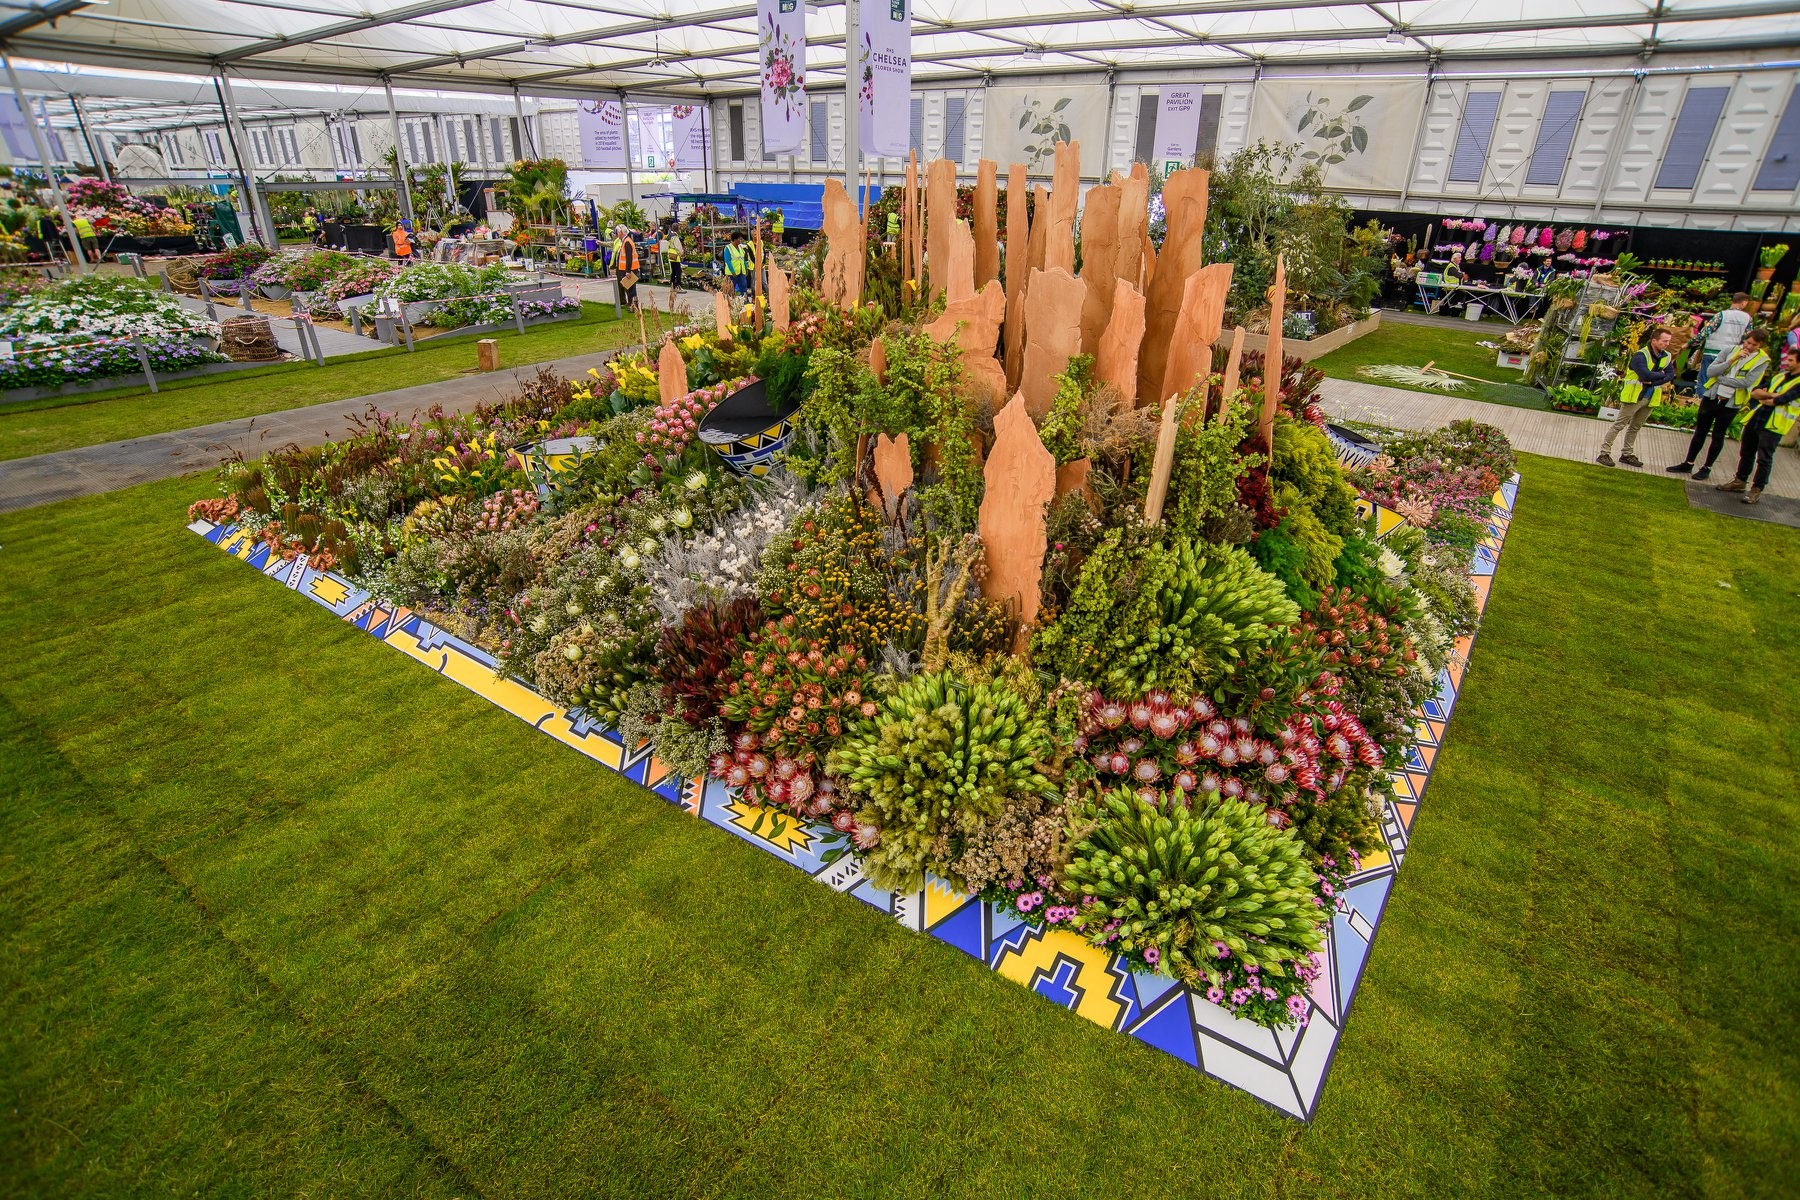 sa does it again, earning gold at chelsea flower show